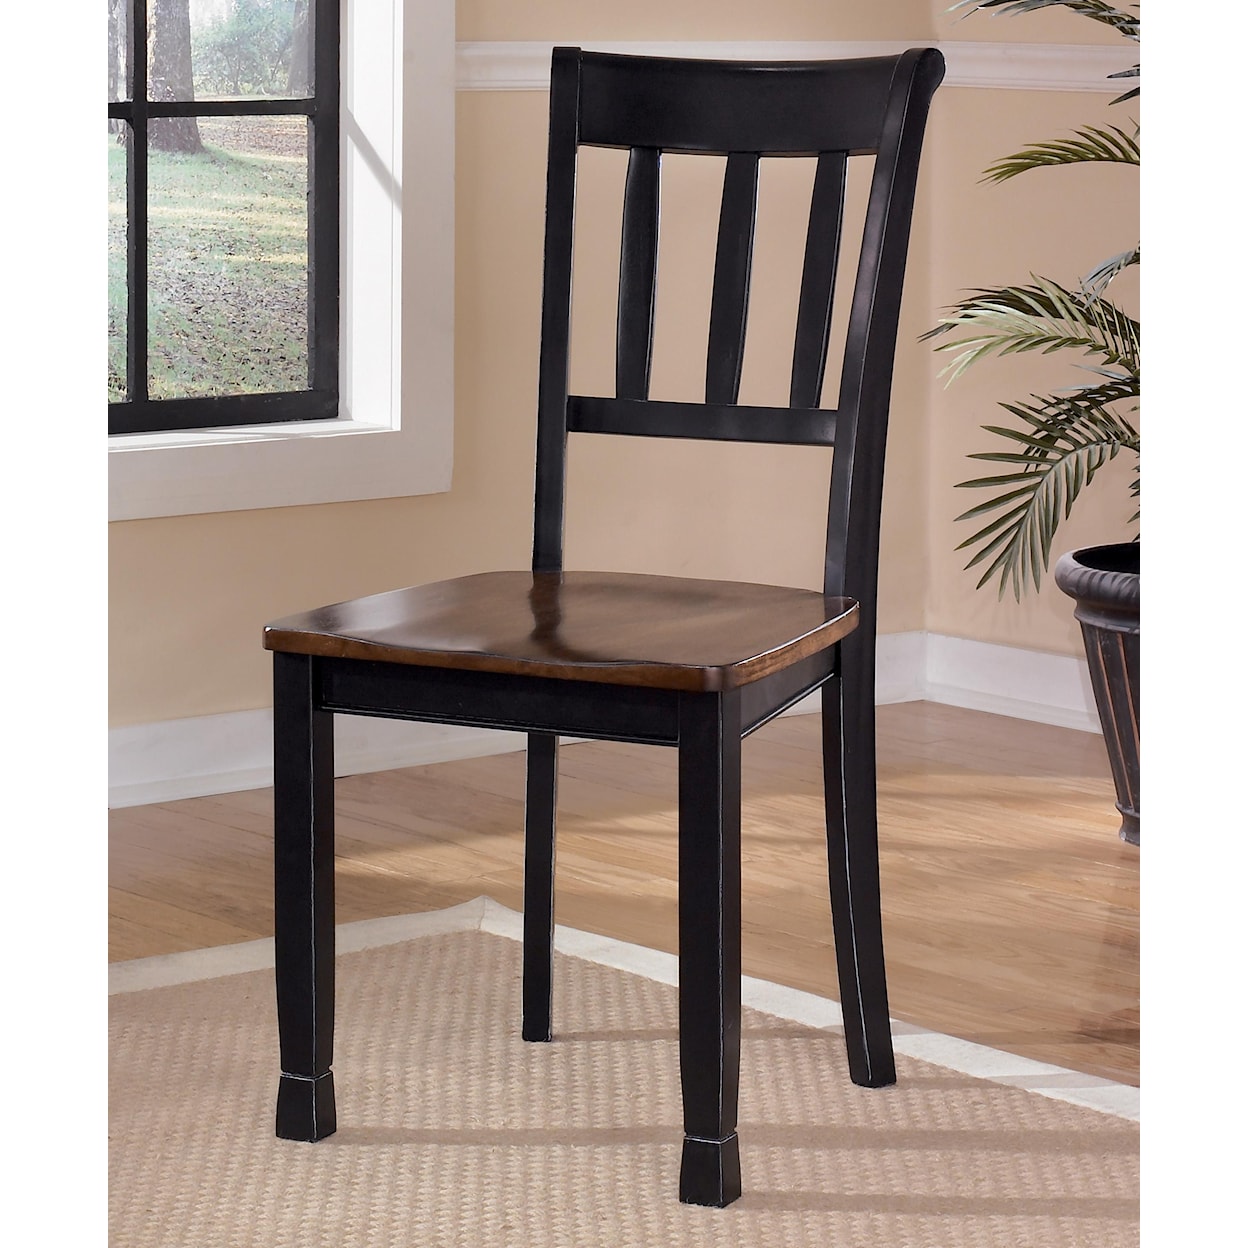 Signature Design by Ashley Furniture Owingsville Dining Room Side Chair